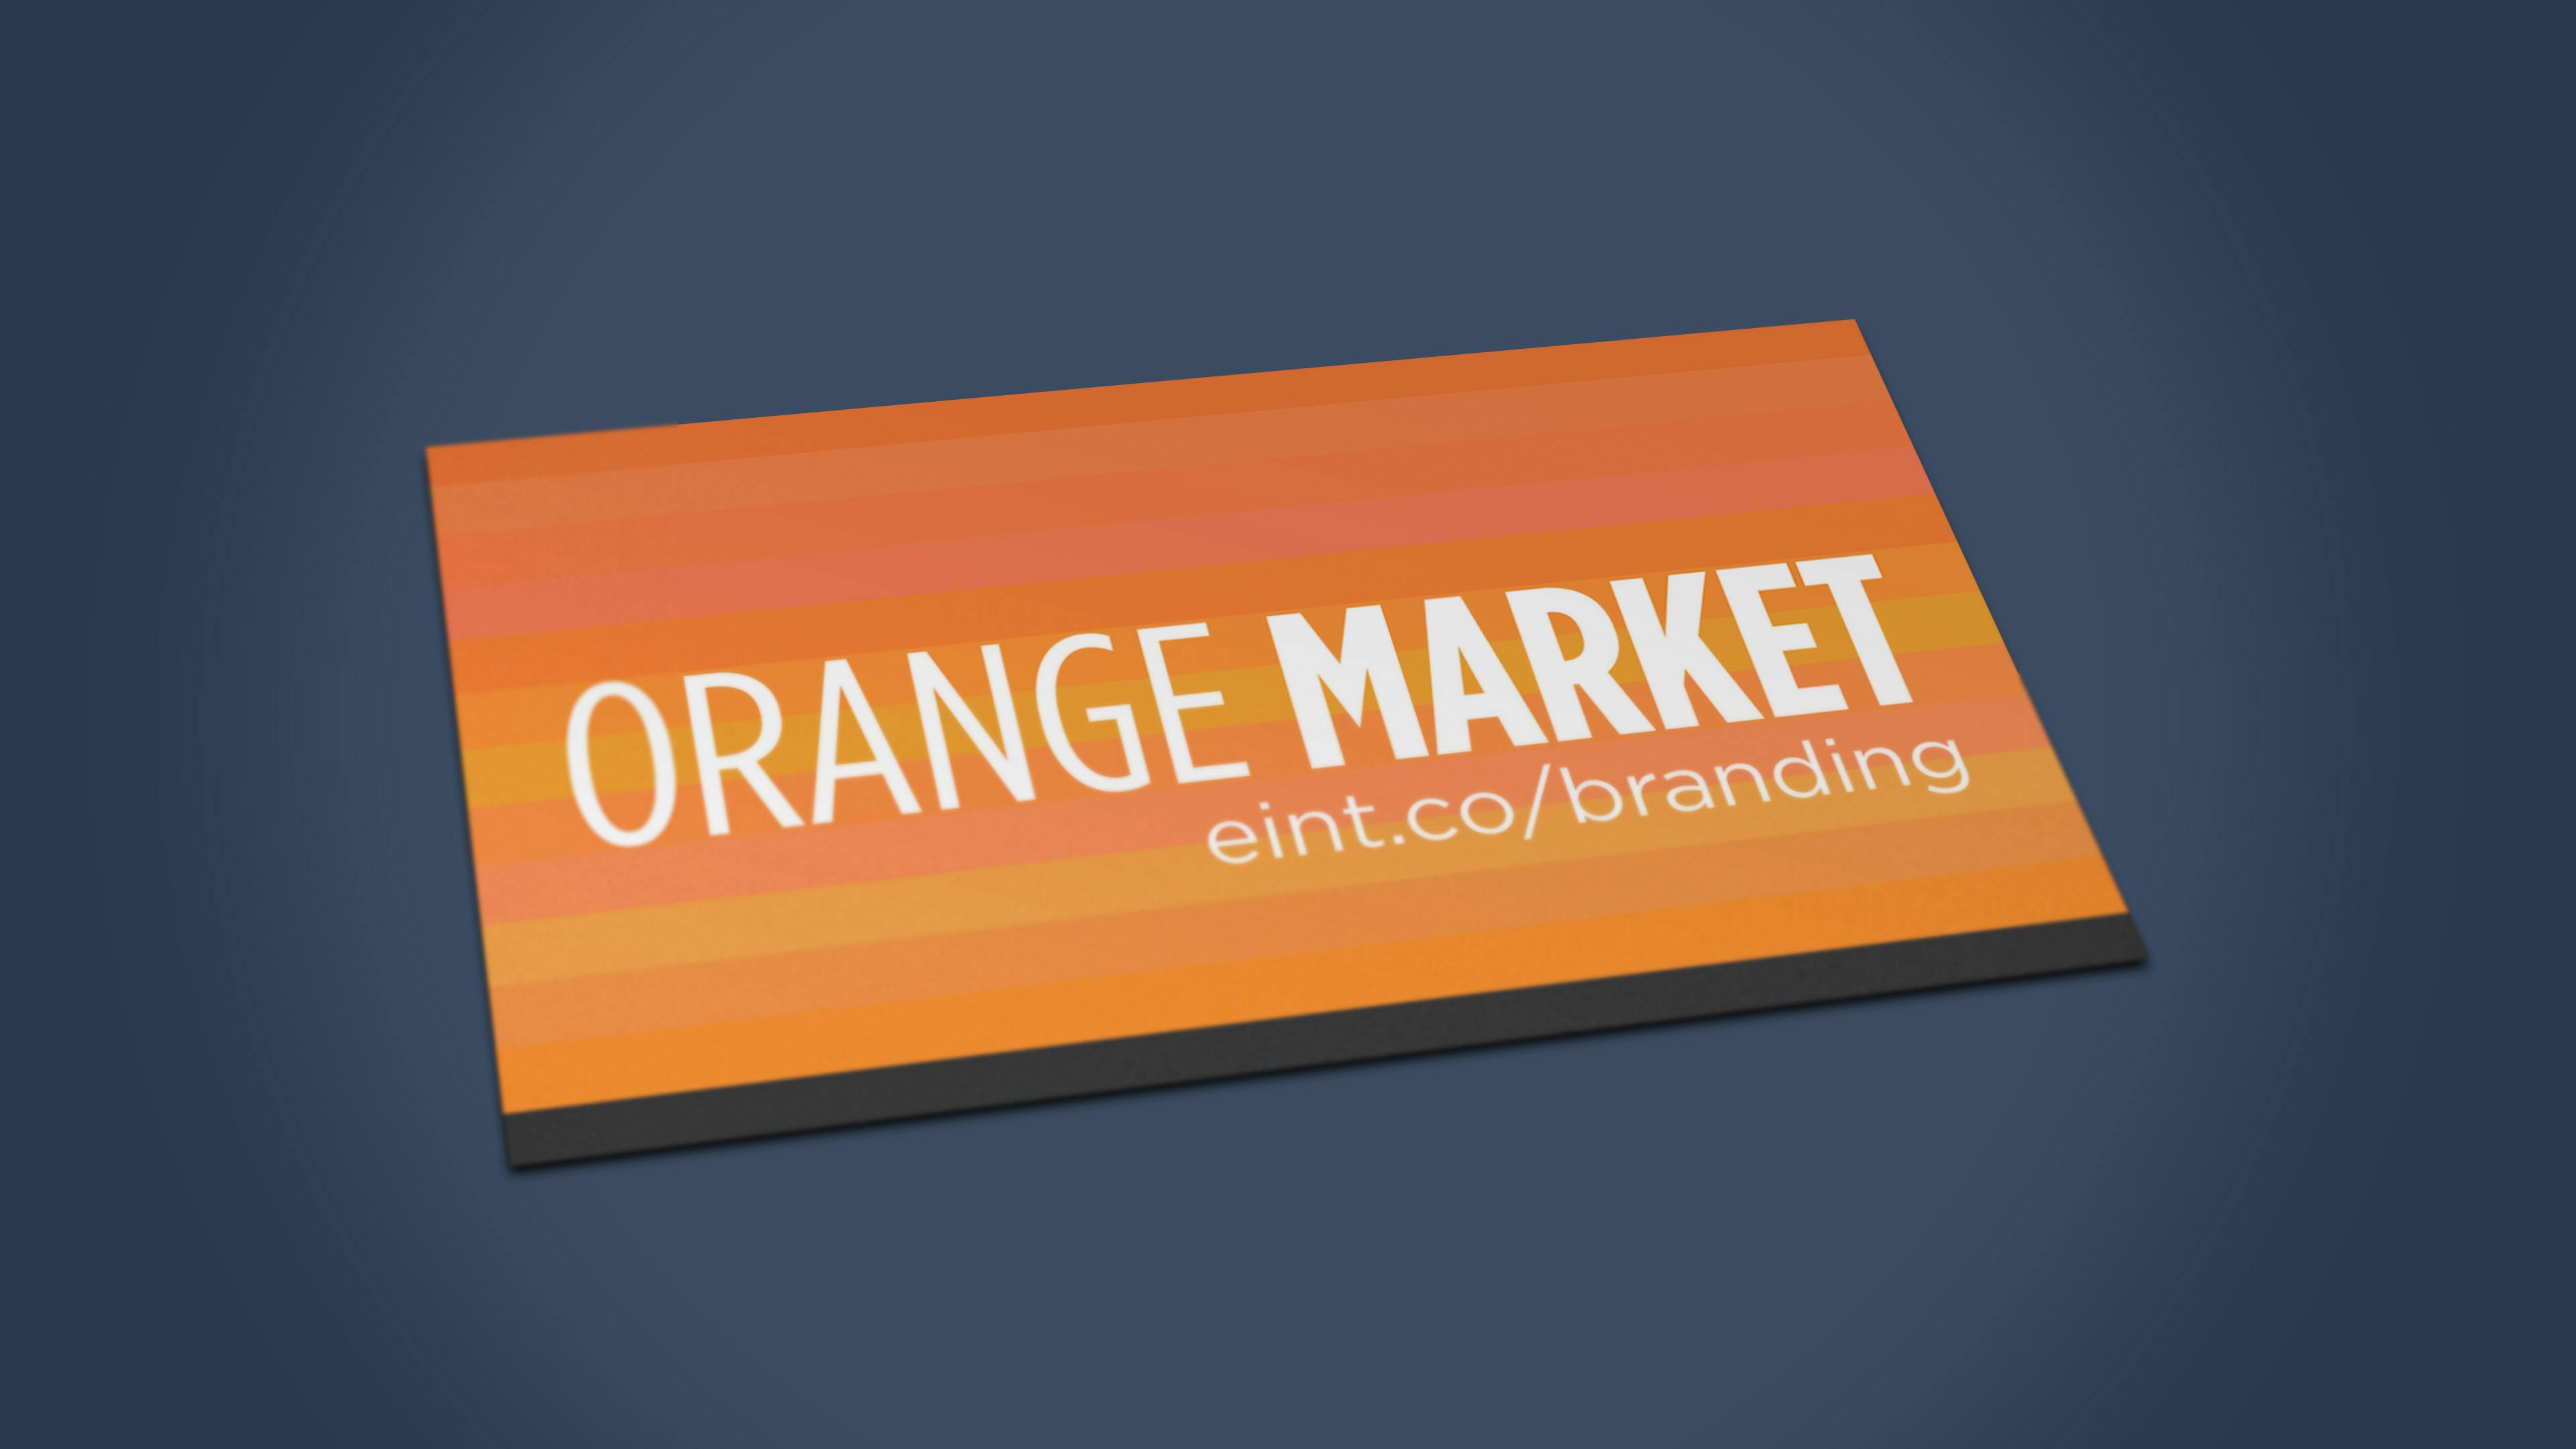 Picture of the Orange Market business card that had stripes of different shades of orange